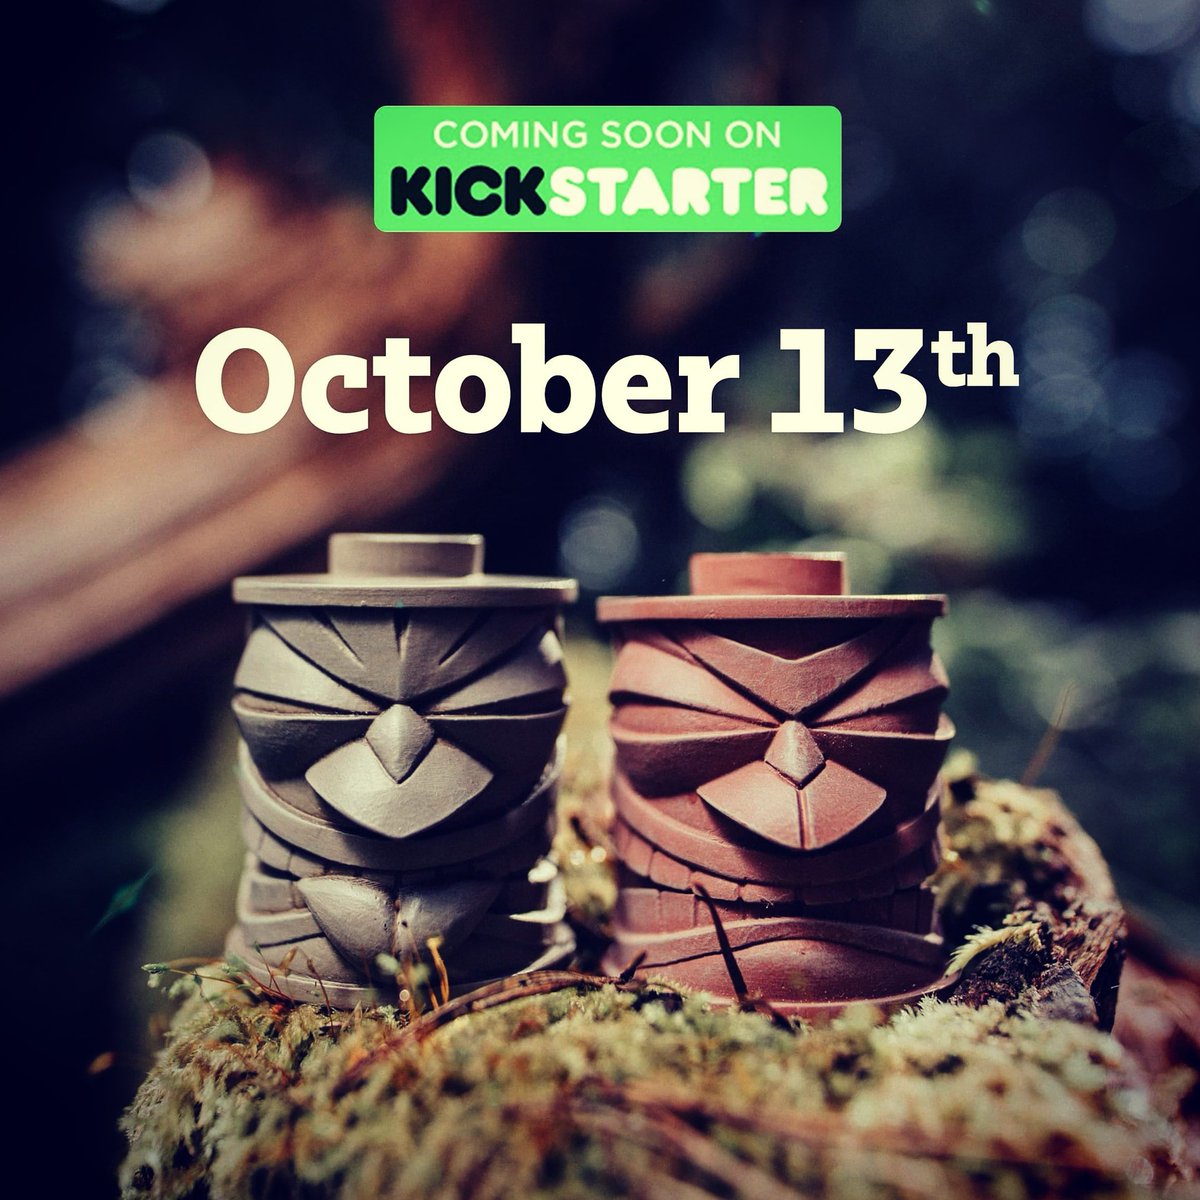 We have a date!
TacTiki is going live on Kickstarter on October 13th. Stay tuned!